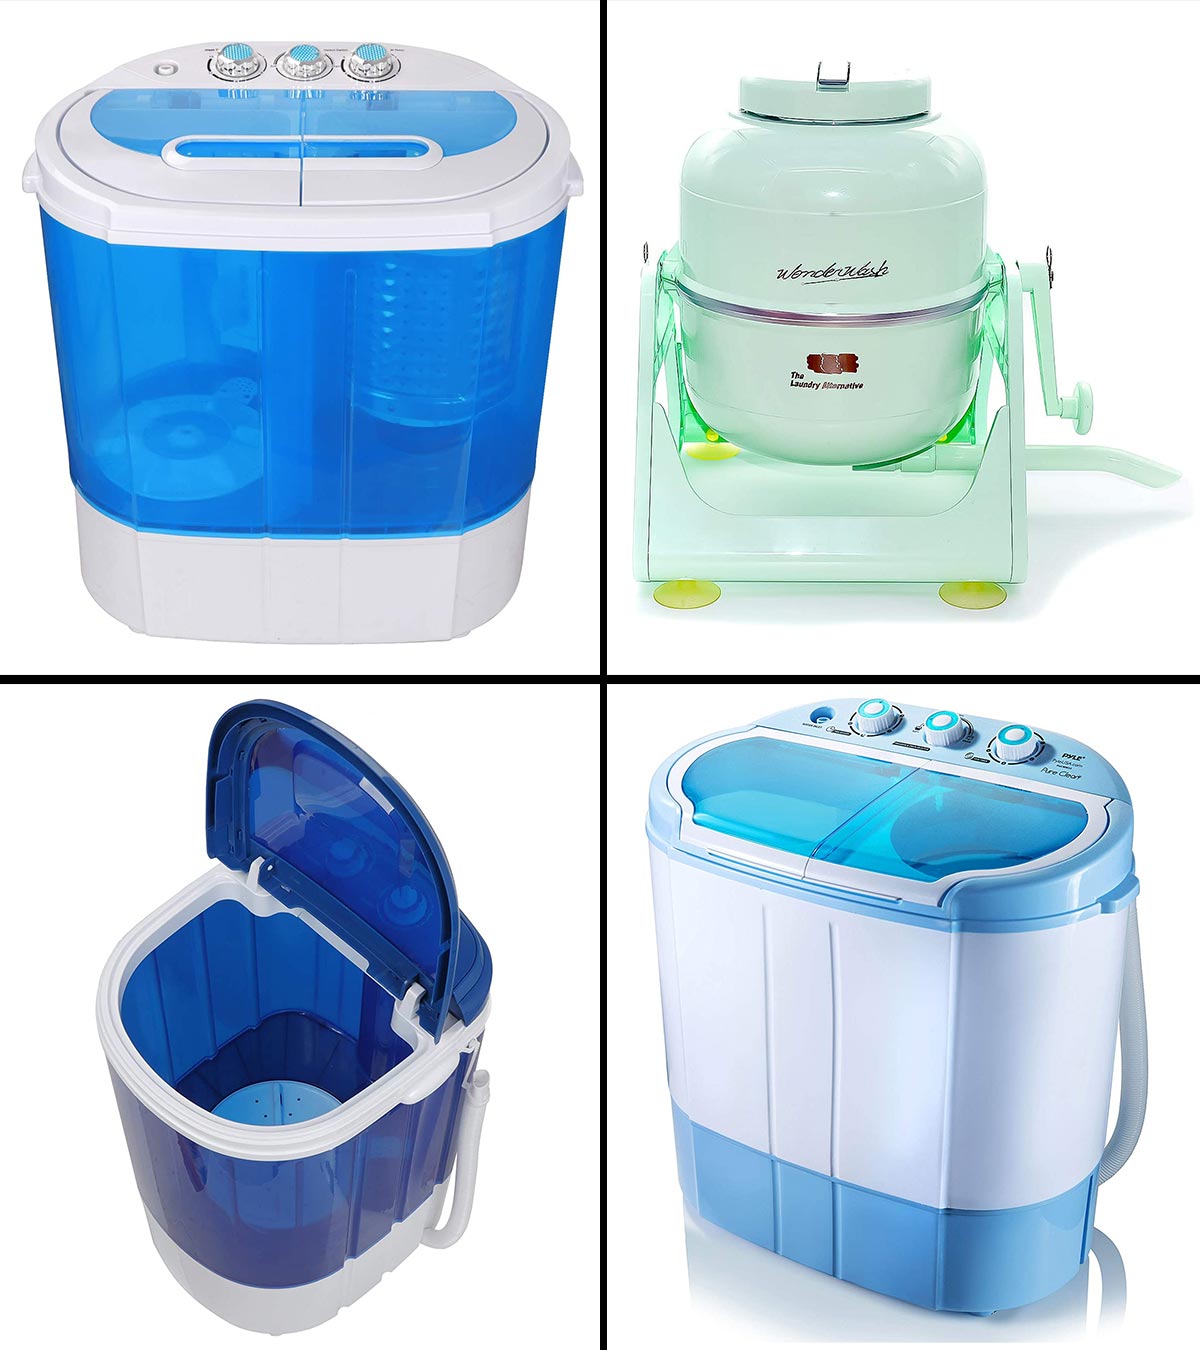 5 Best Washing Machines For Cloth Diapers: Reviews And Buying Guide 2023